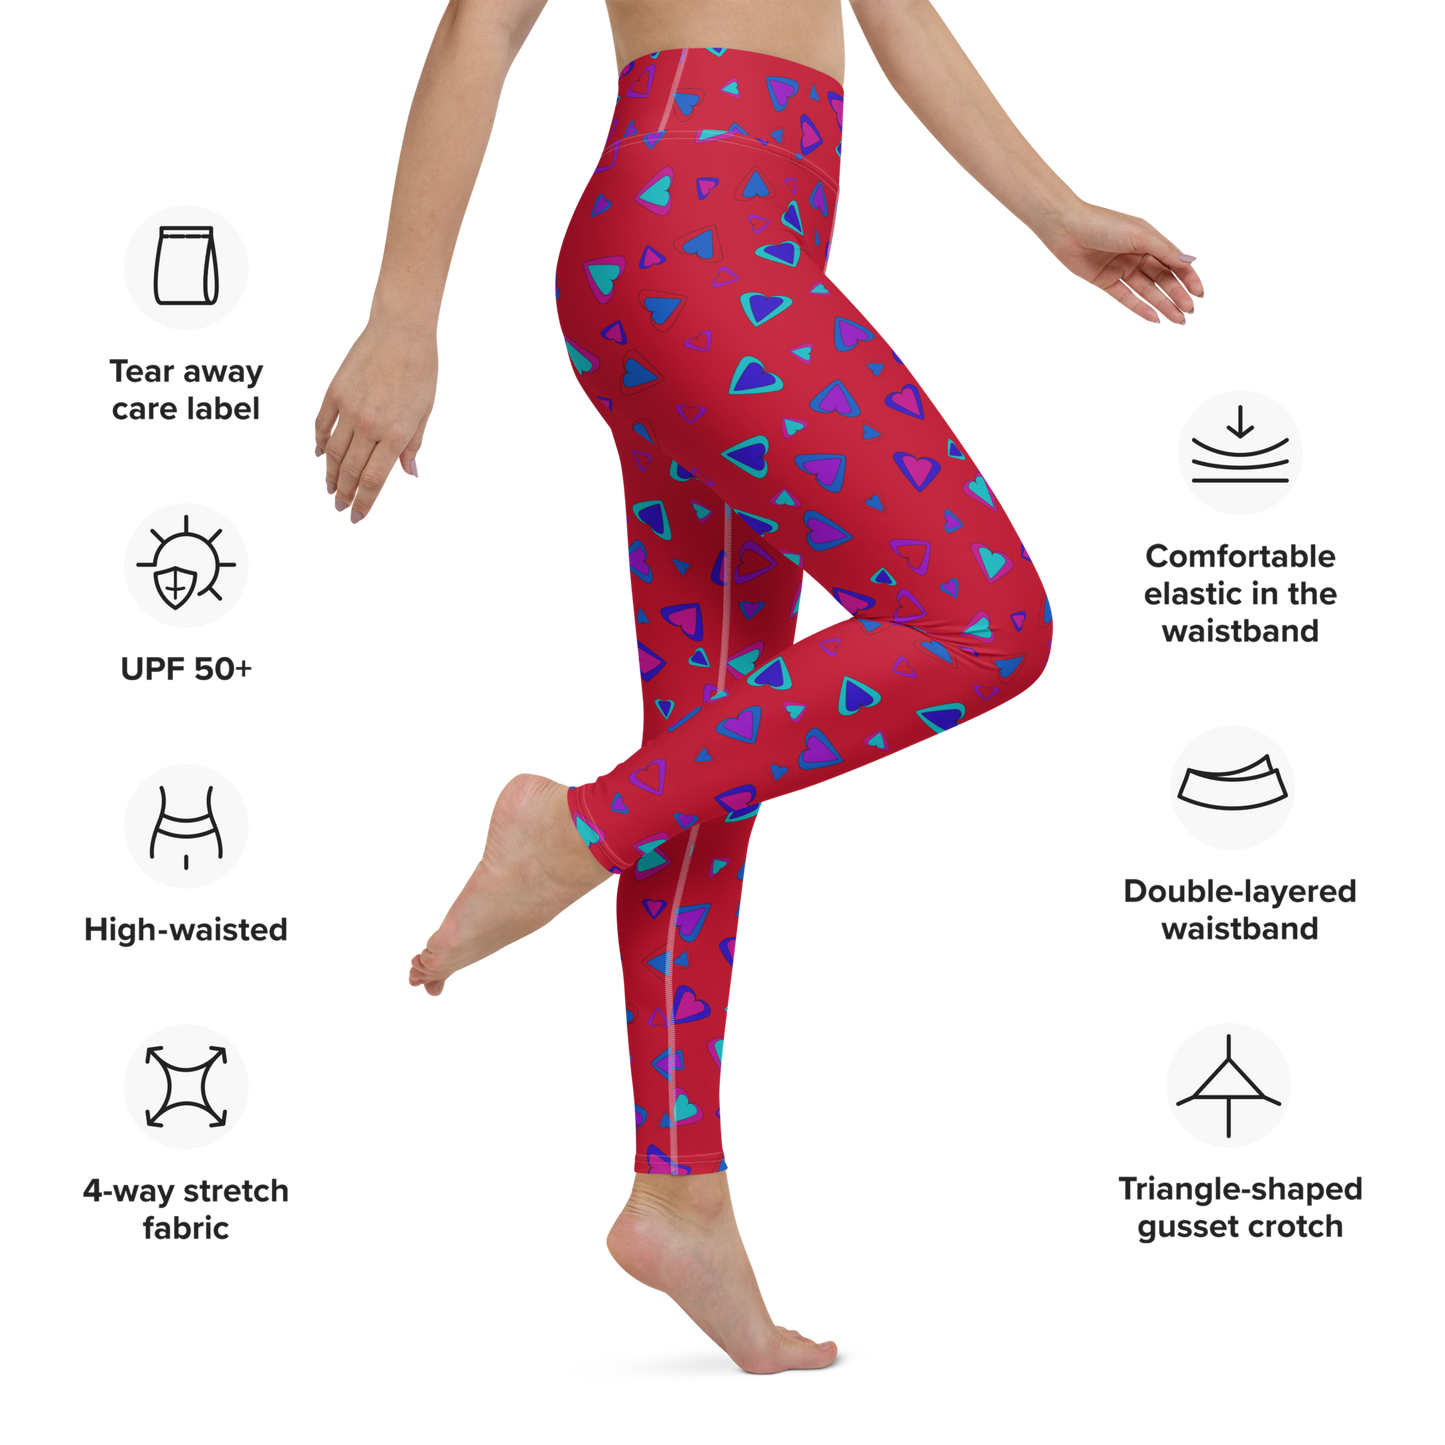 Rainbow Of Hearts | Batch 01 | Seamless Patterns | All-Over Print Yoga Leggings - #1